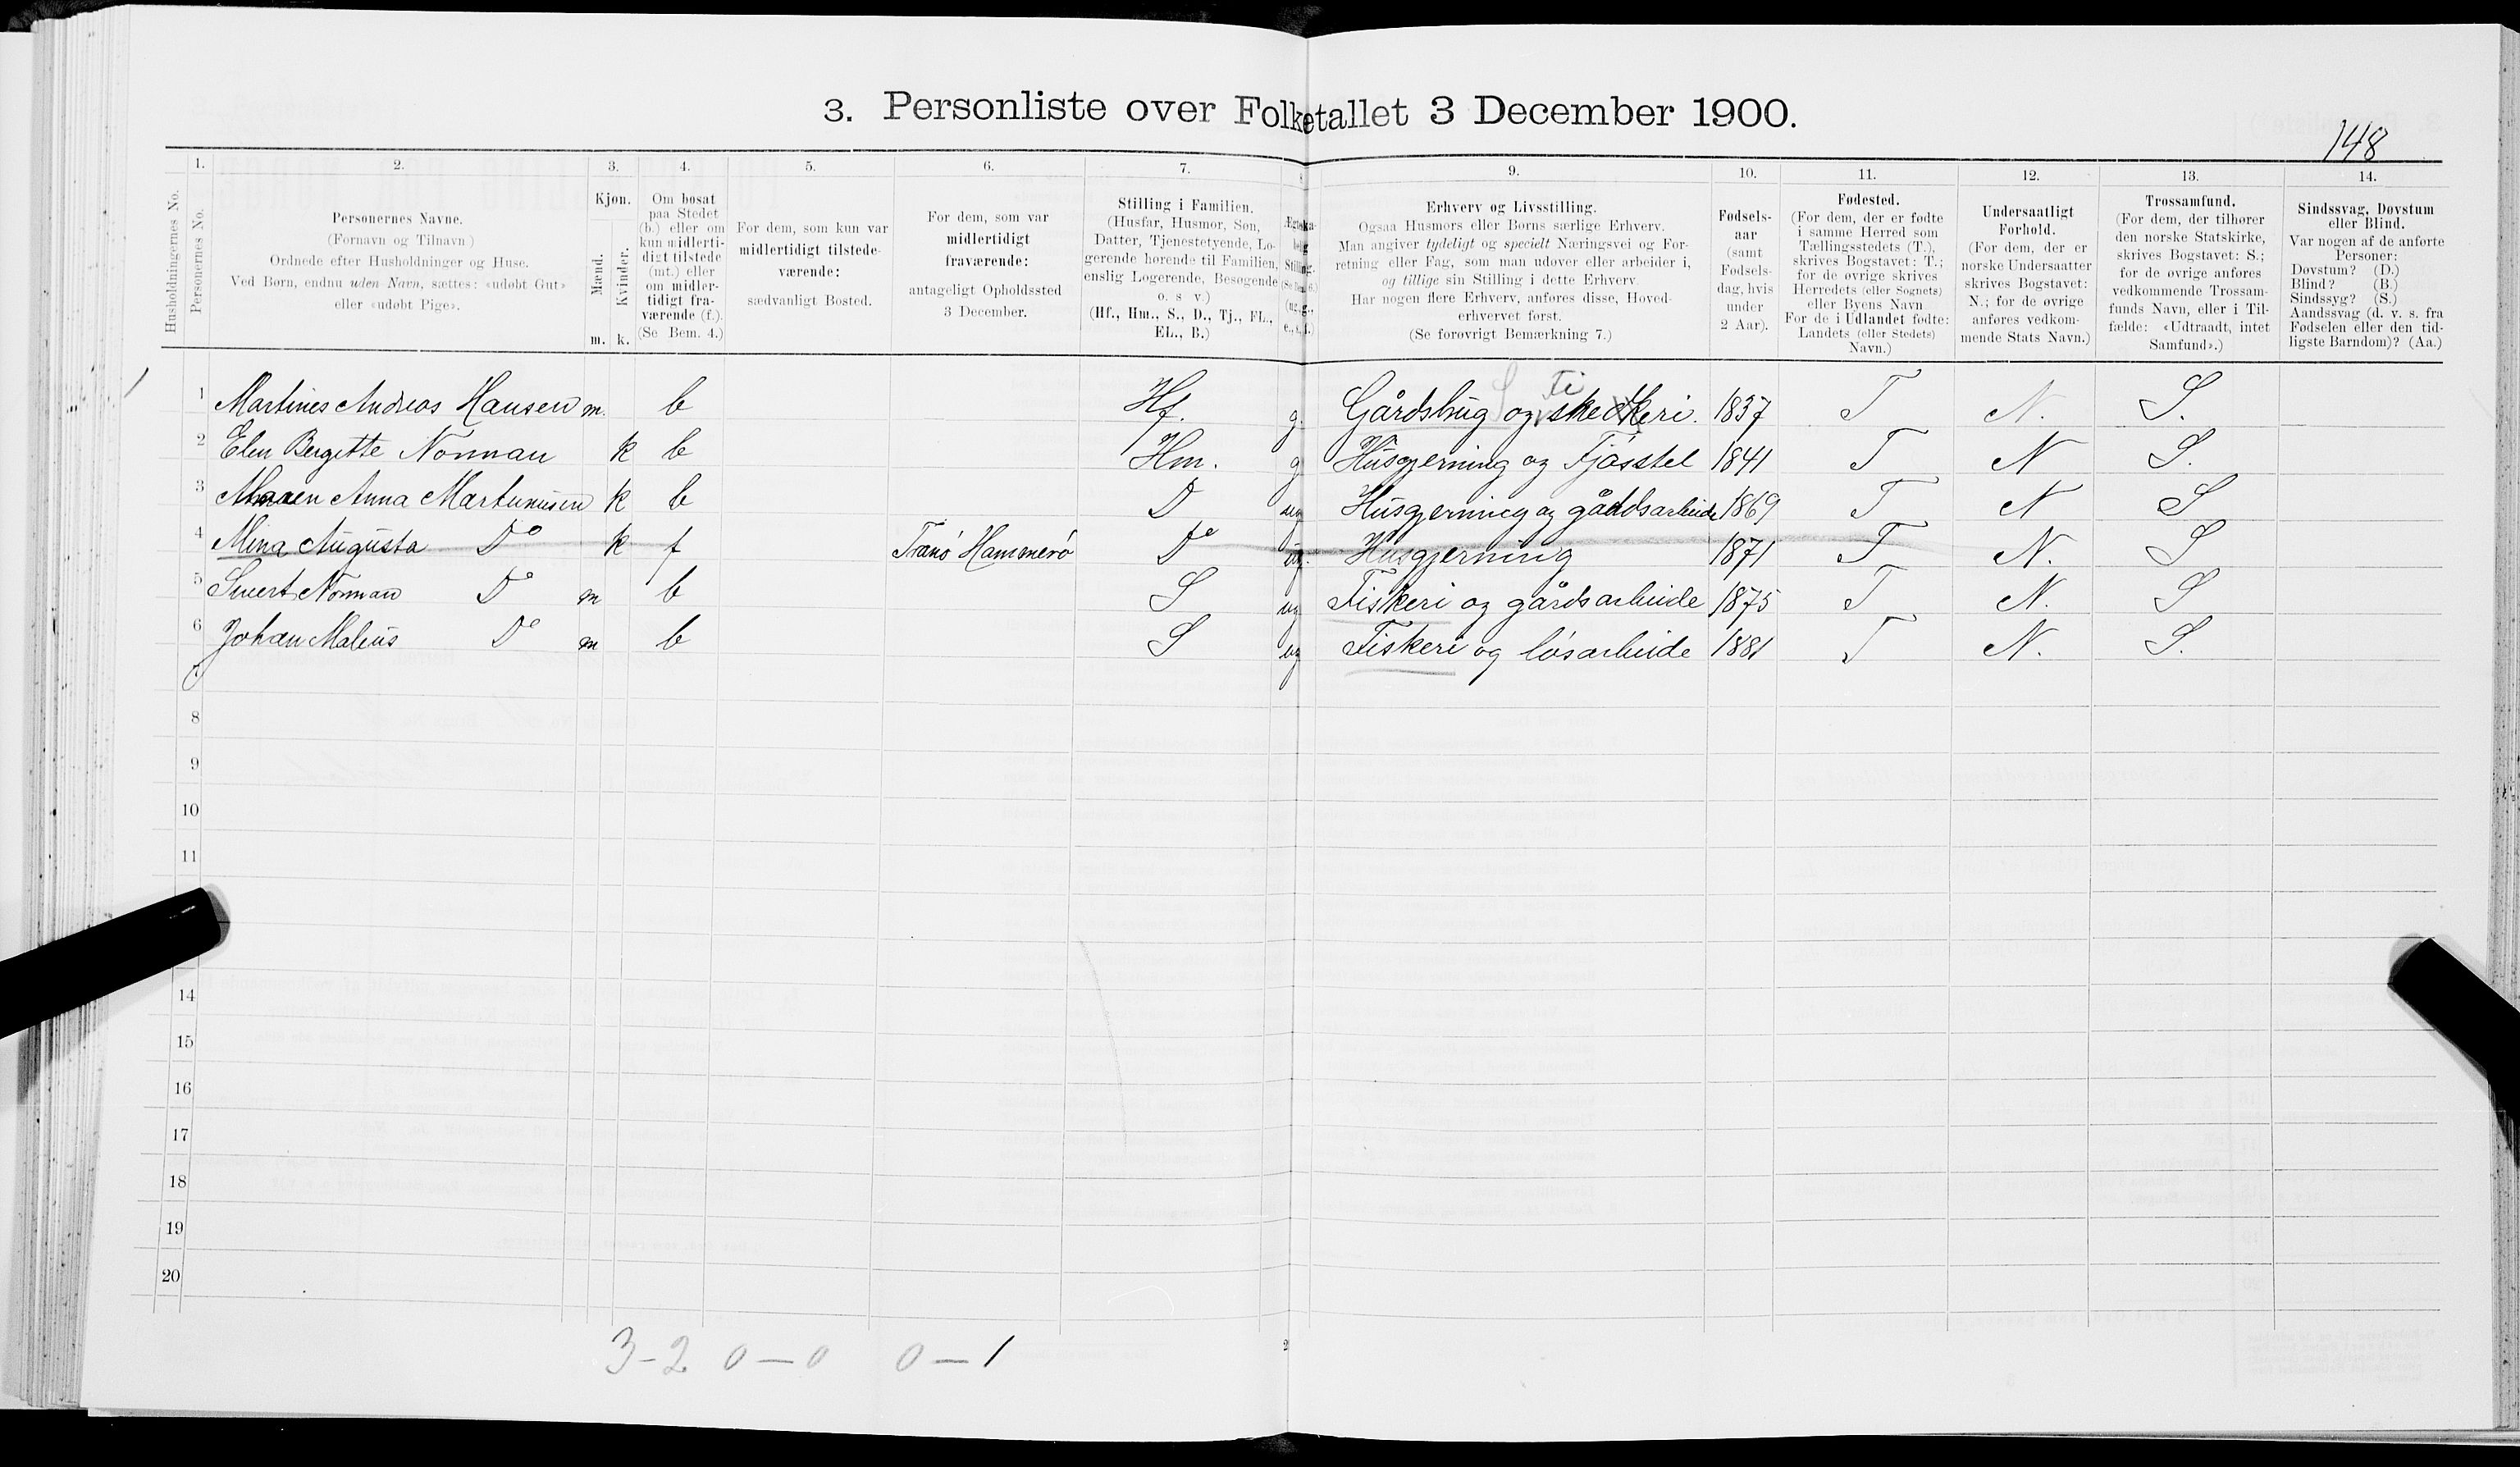 SAT, 1900 census for Hamarøy, 1900, p. 165